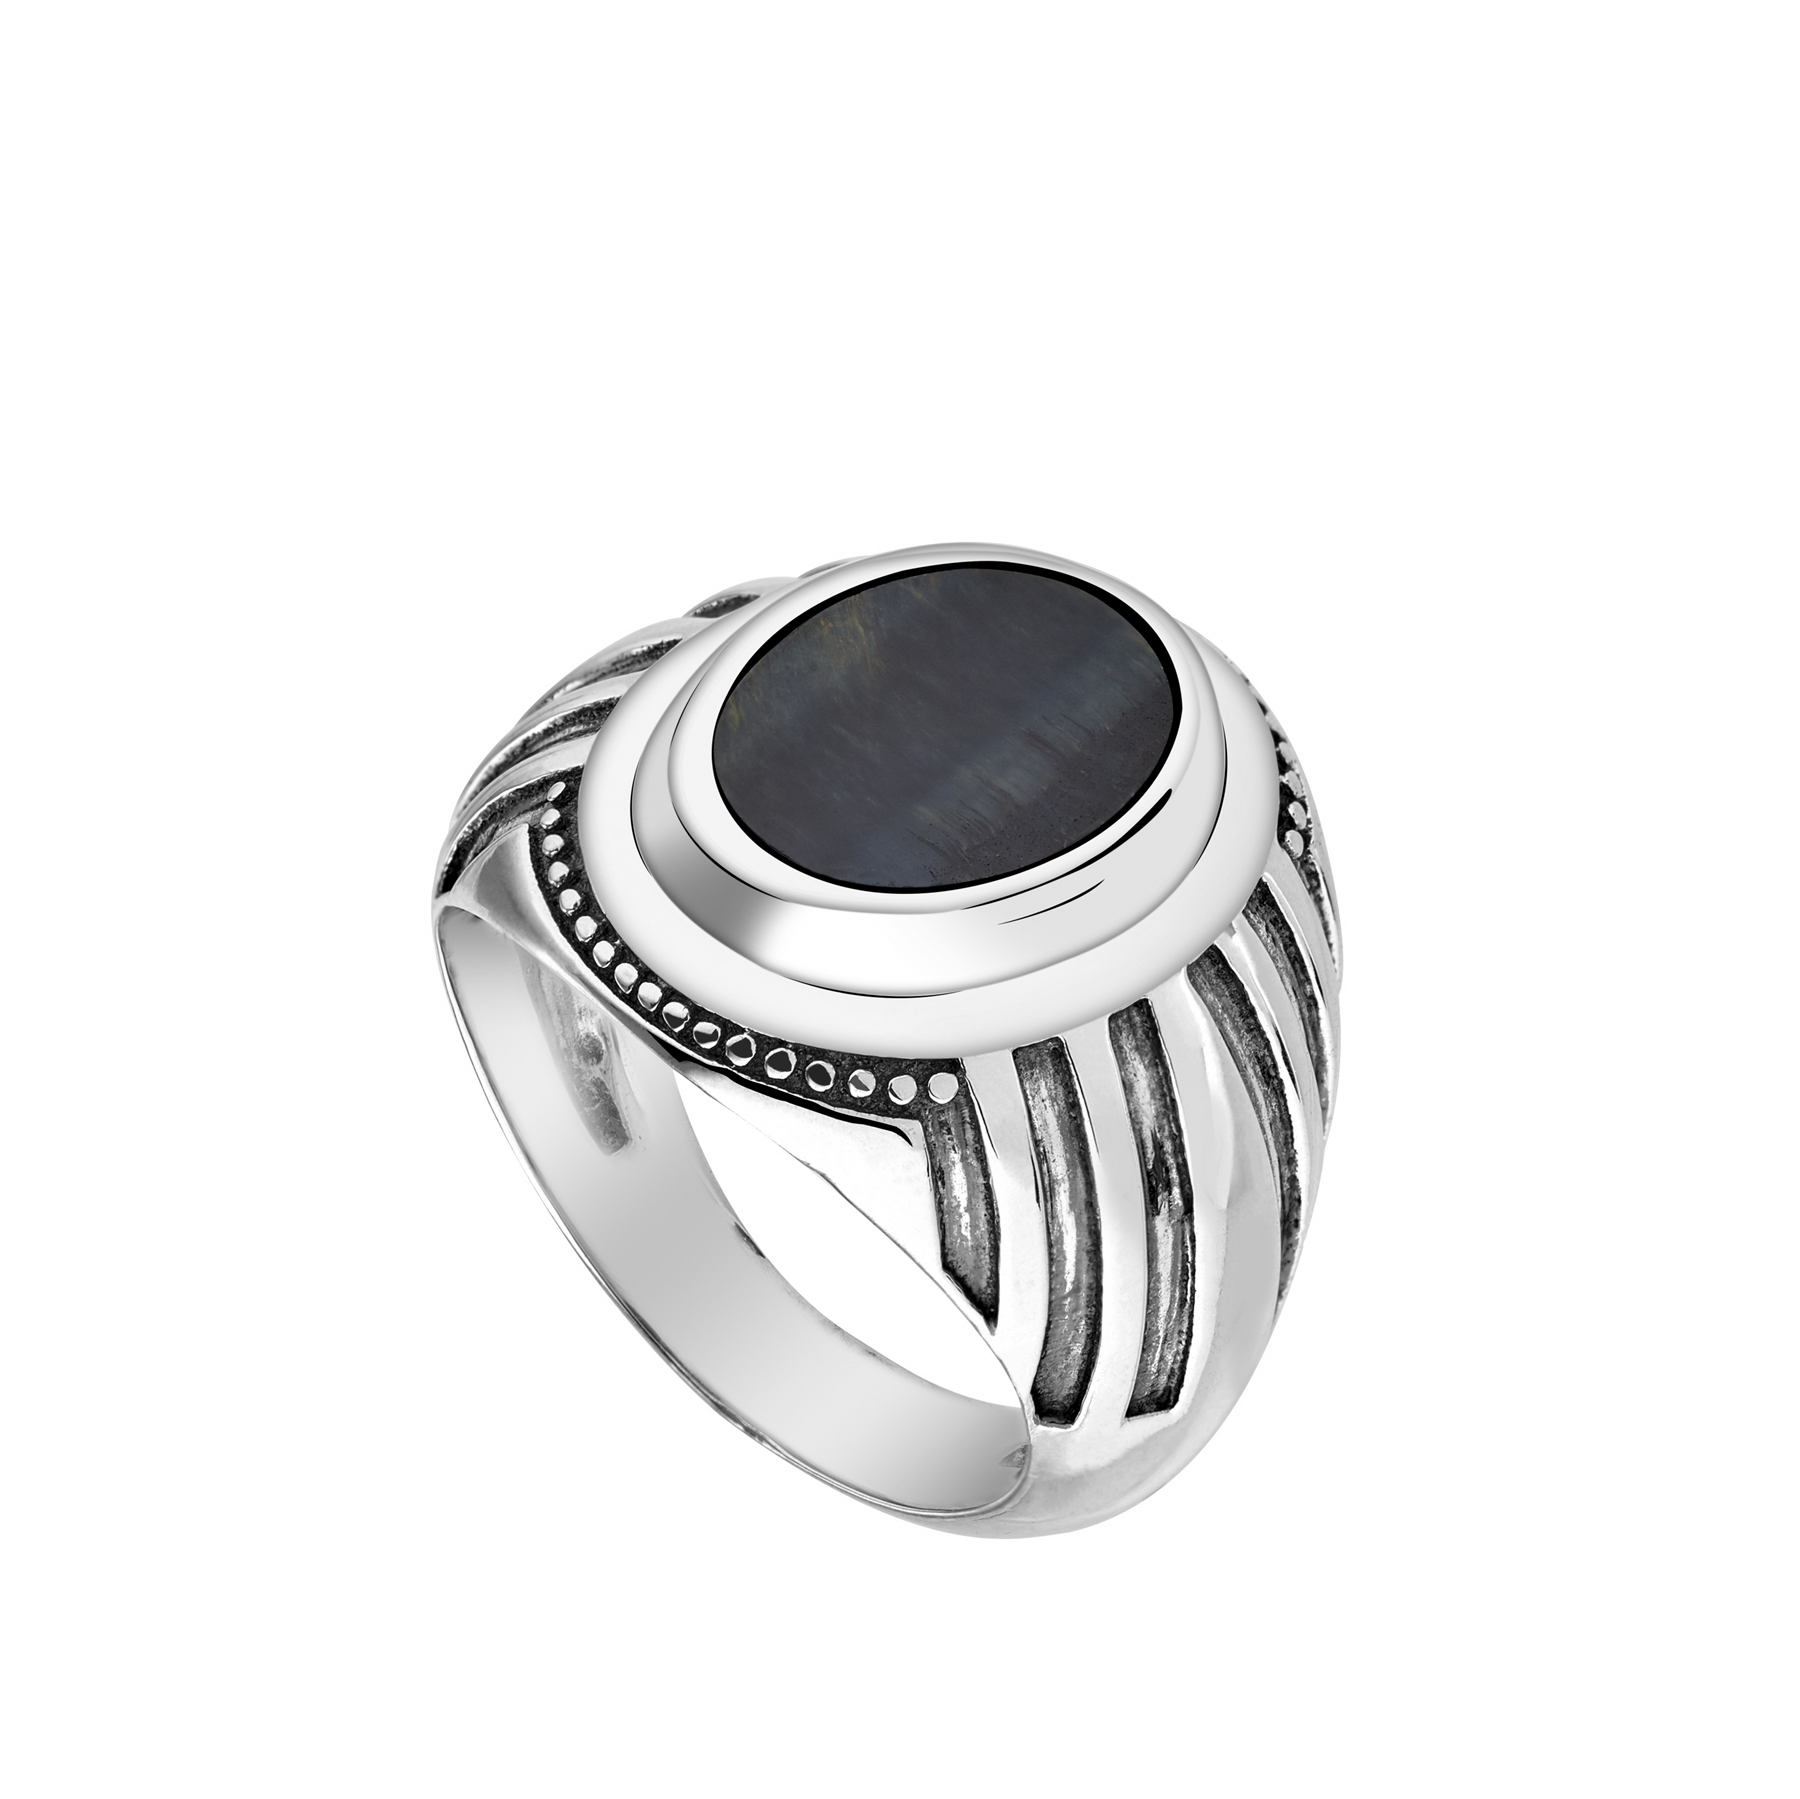 Bague onyx argent Agostino